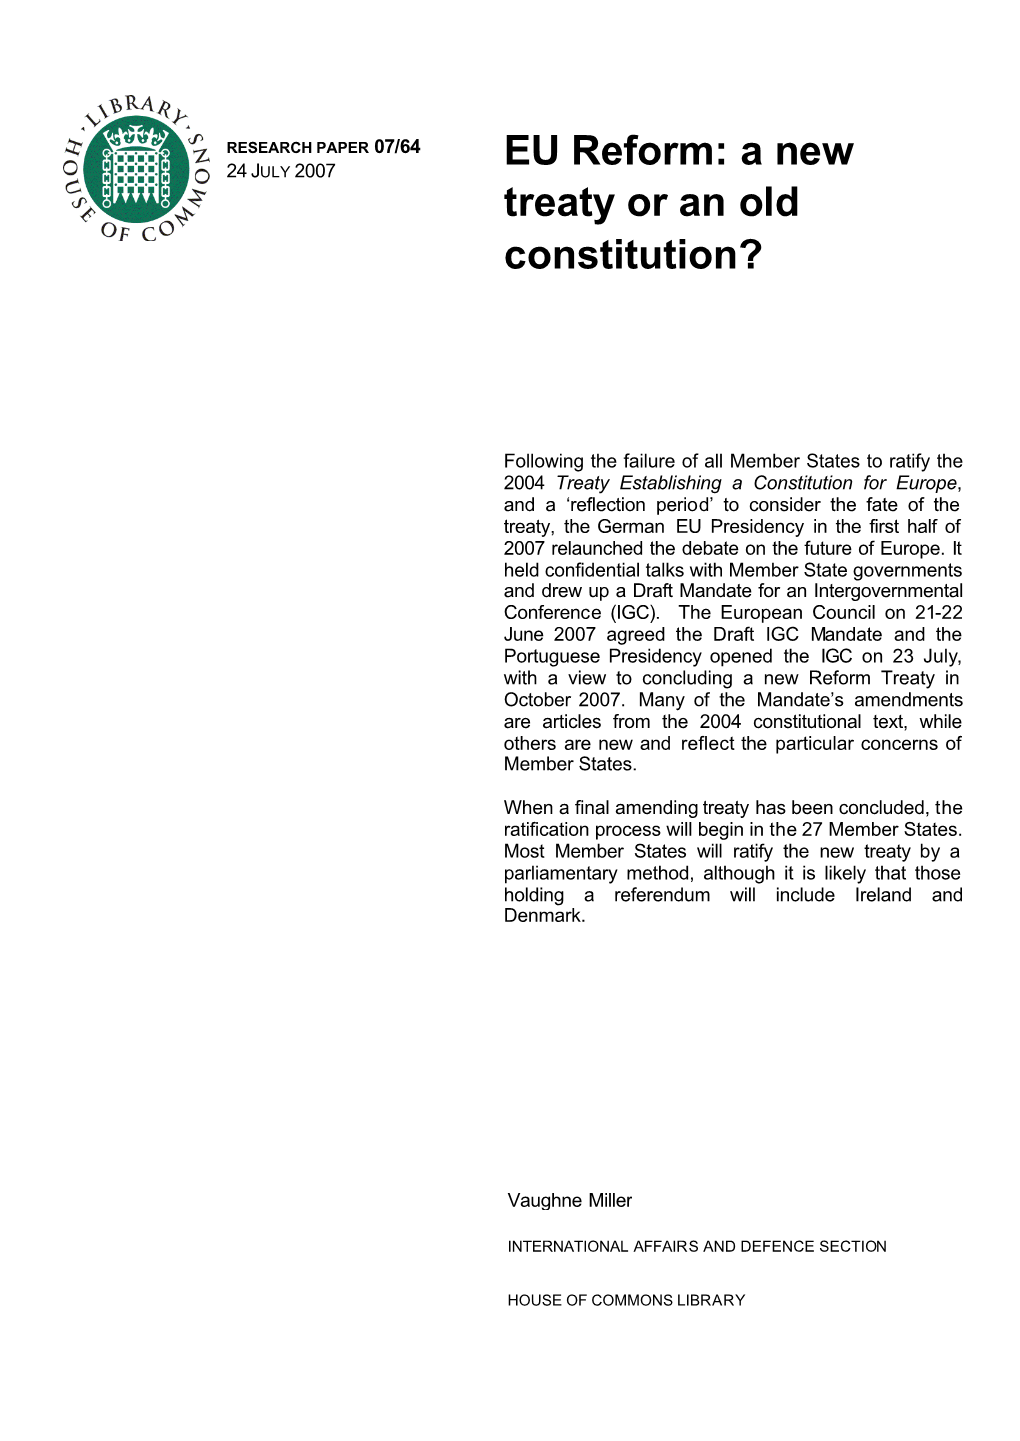 EU Reform: a New Treaty Or an Old Constitution?